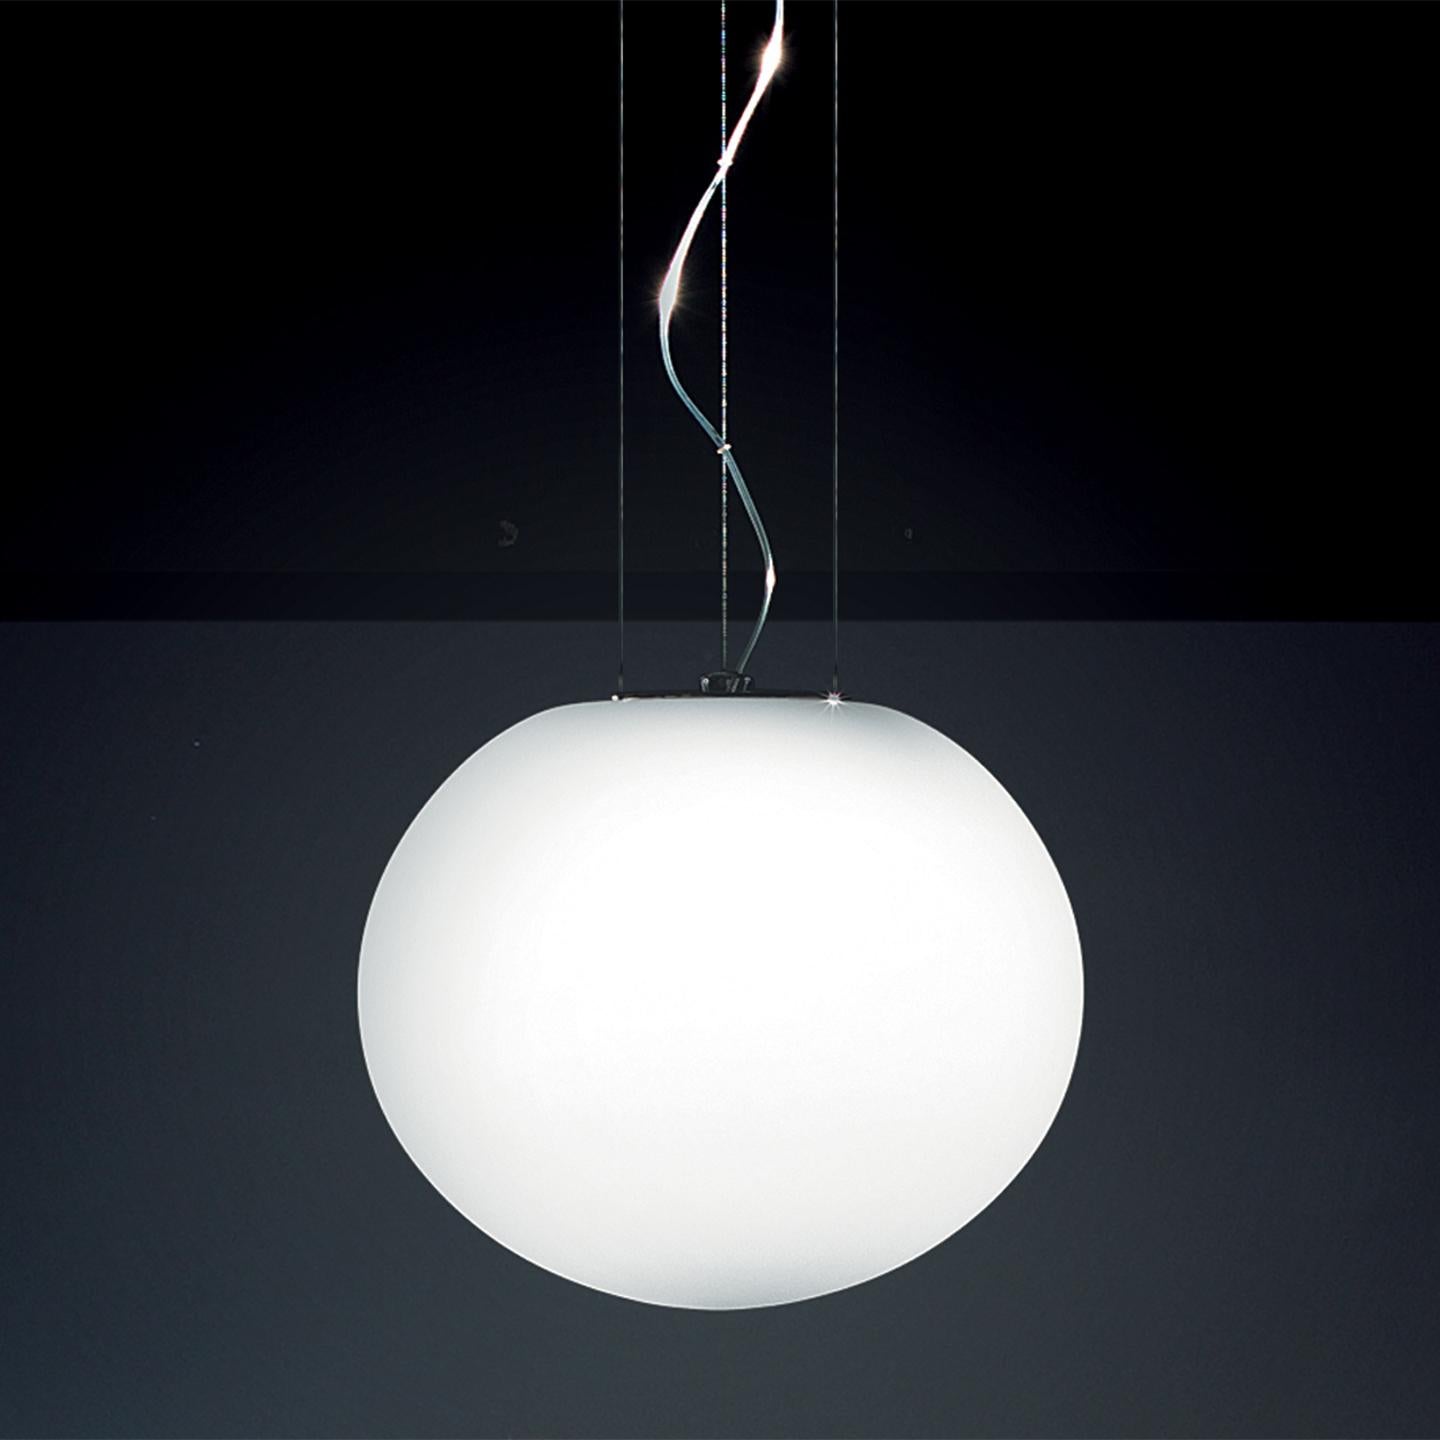 A minimal design that seems to float delicately in your space, the Sphera Pendant is made of handblown Italian glass. Matteo Thun designed Sphera in 2000 as a simple, slightly flattened oval shape that emphasizes the remarkable quality that goes